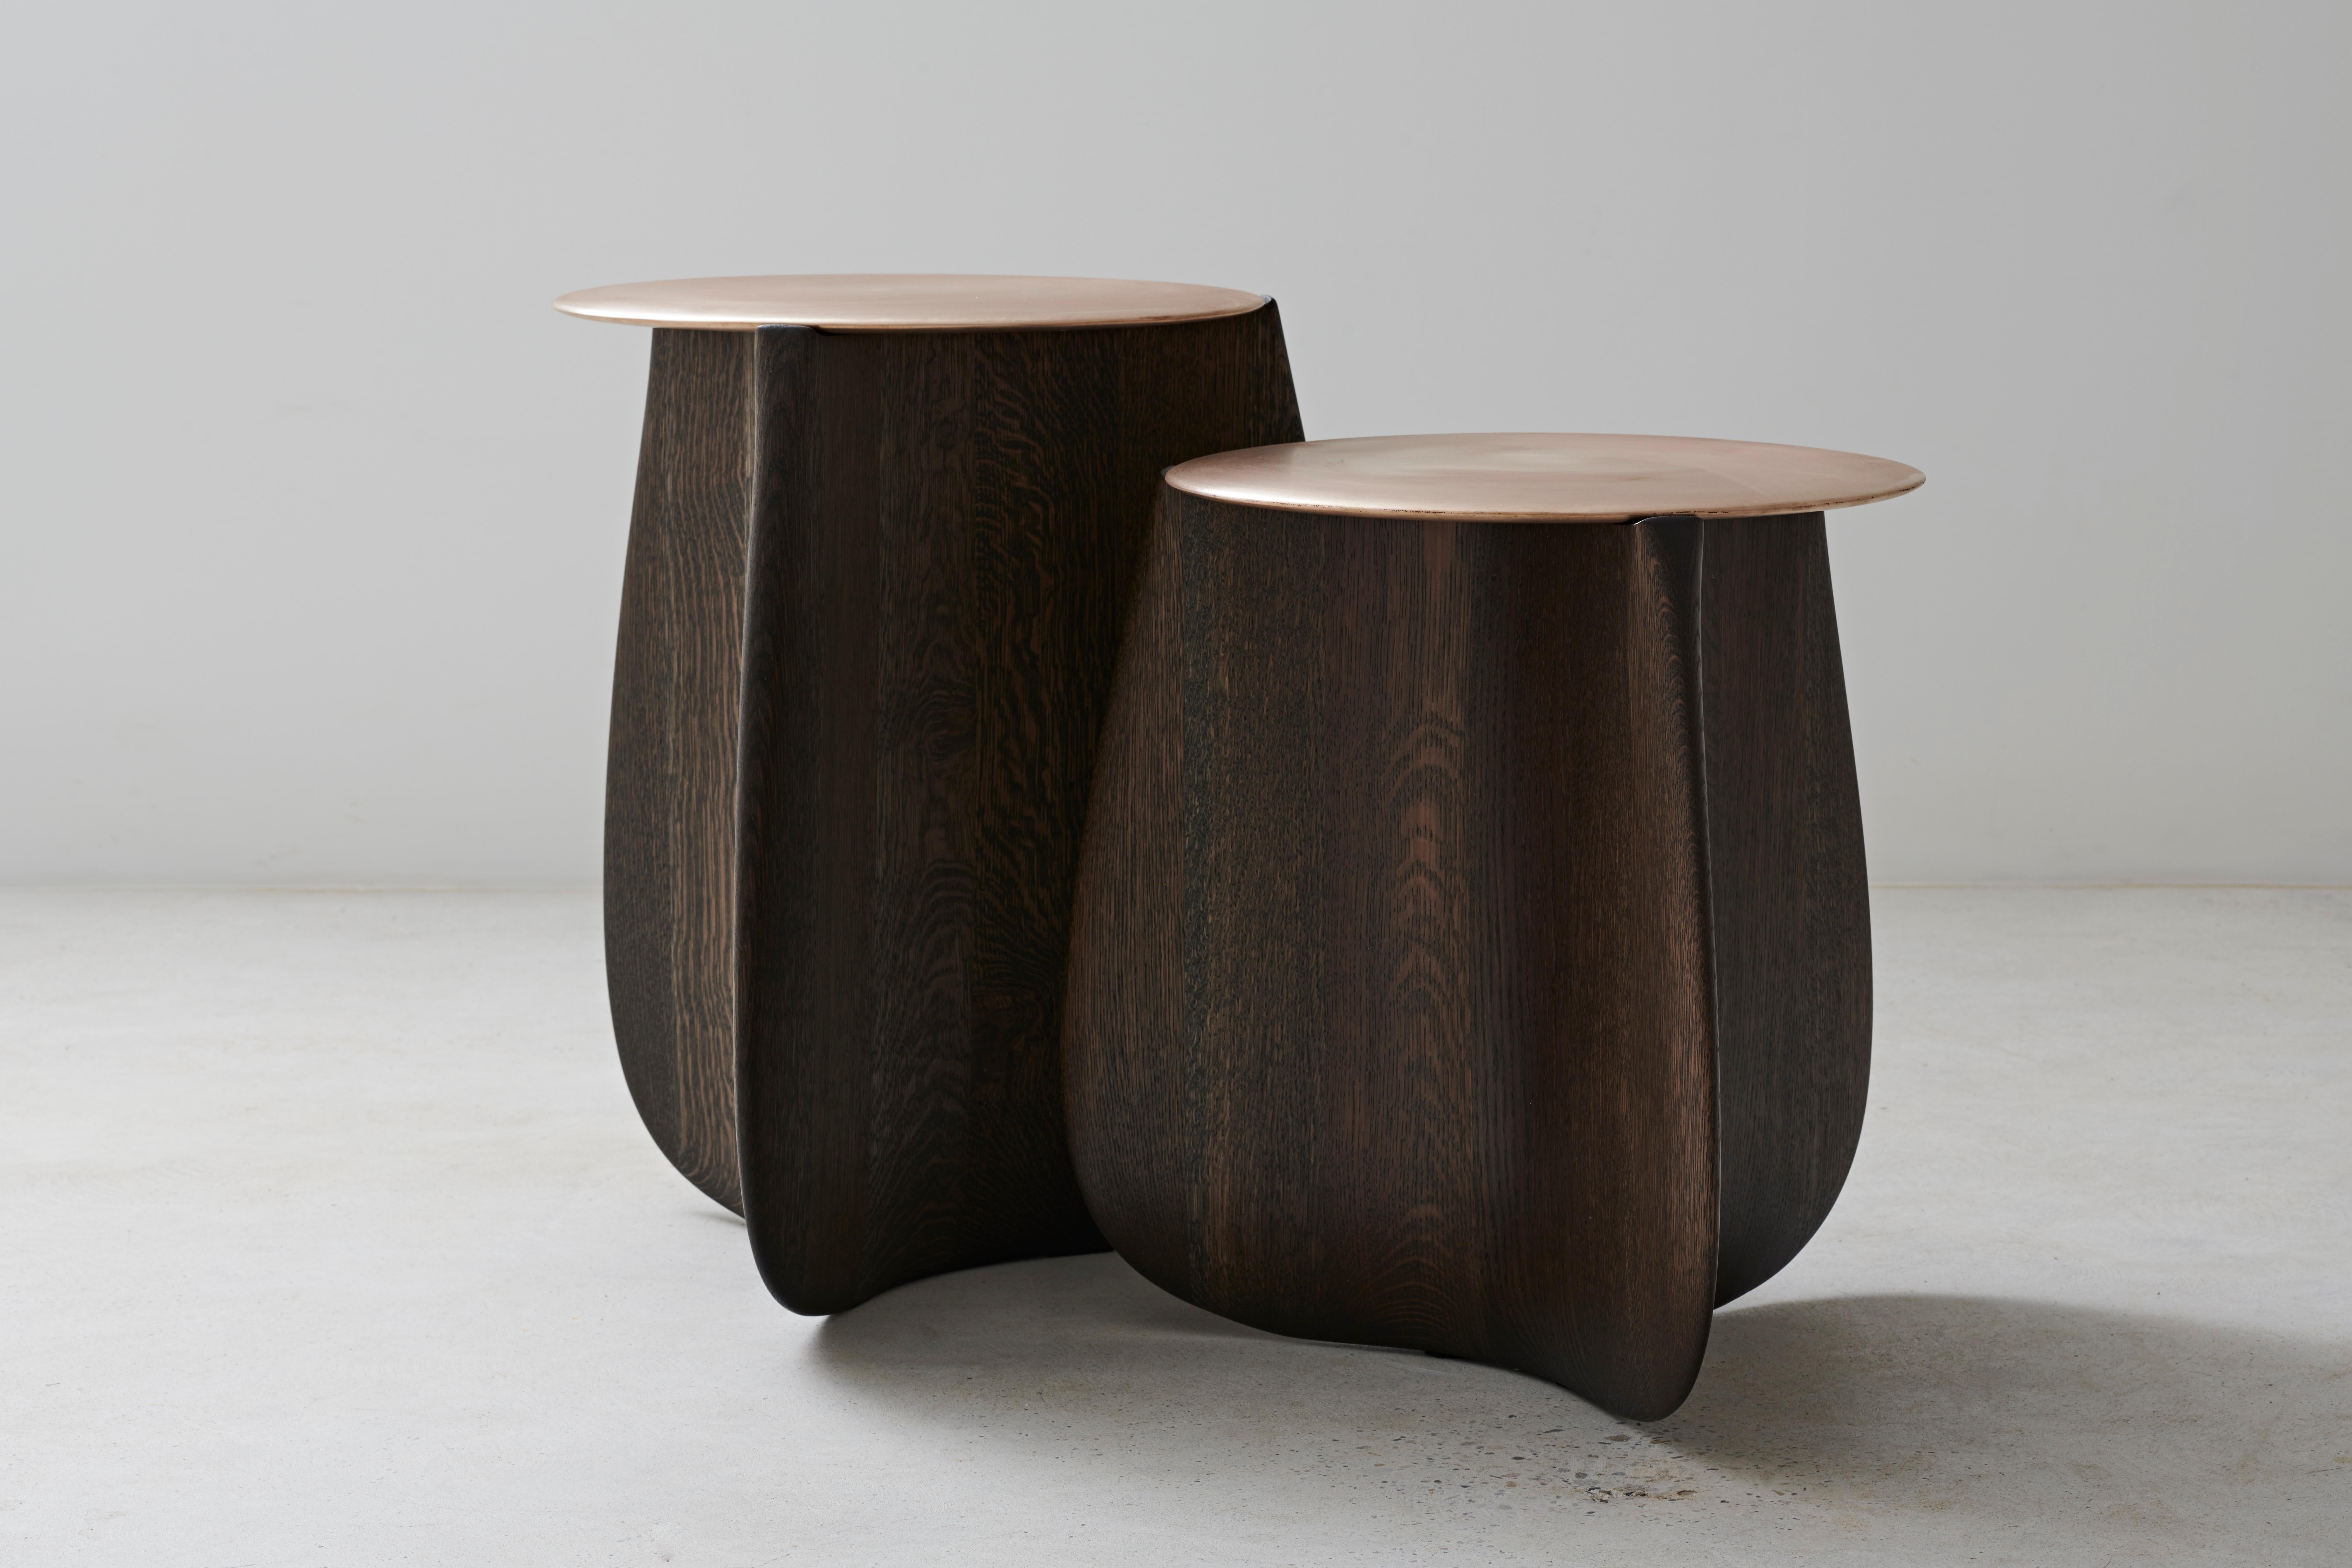 A burnished, cast bronze top perches on a sculpted, solid hardwood base on this organic side table by Izm Design. Available in 2 heights and a range of wood species and finishes.
 